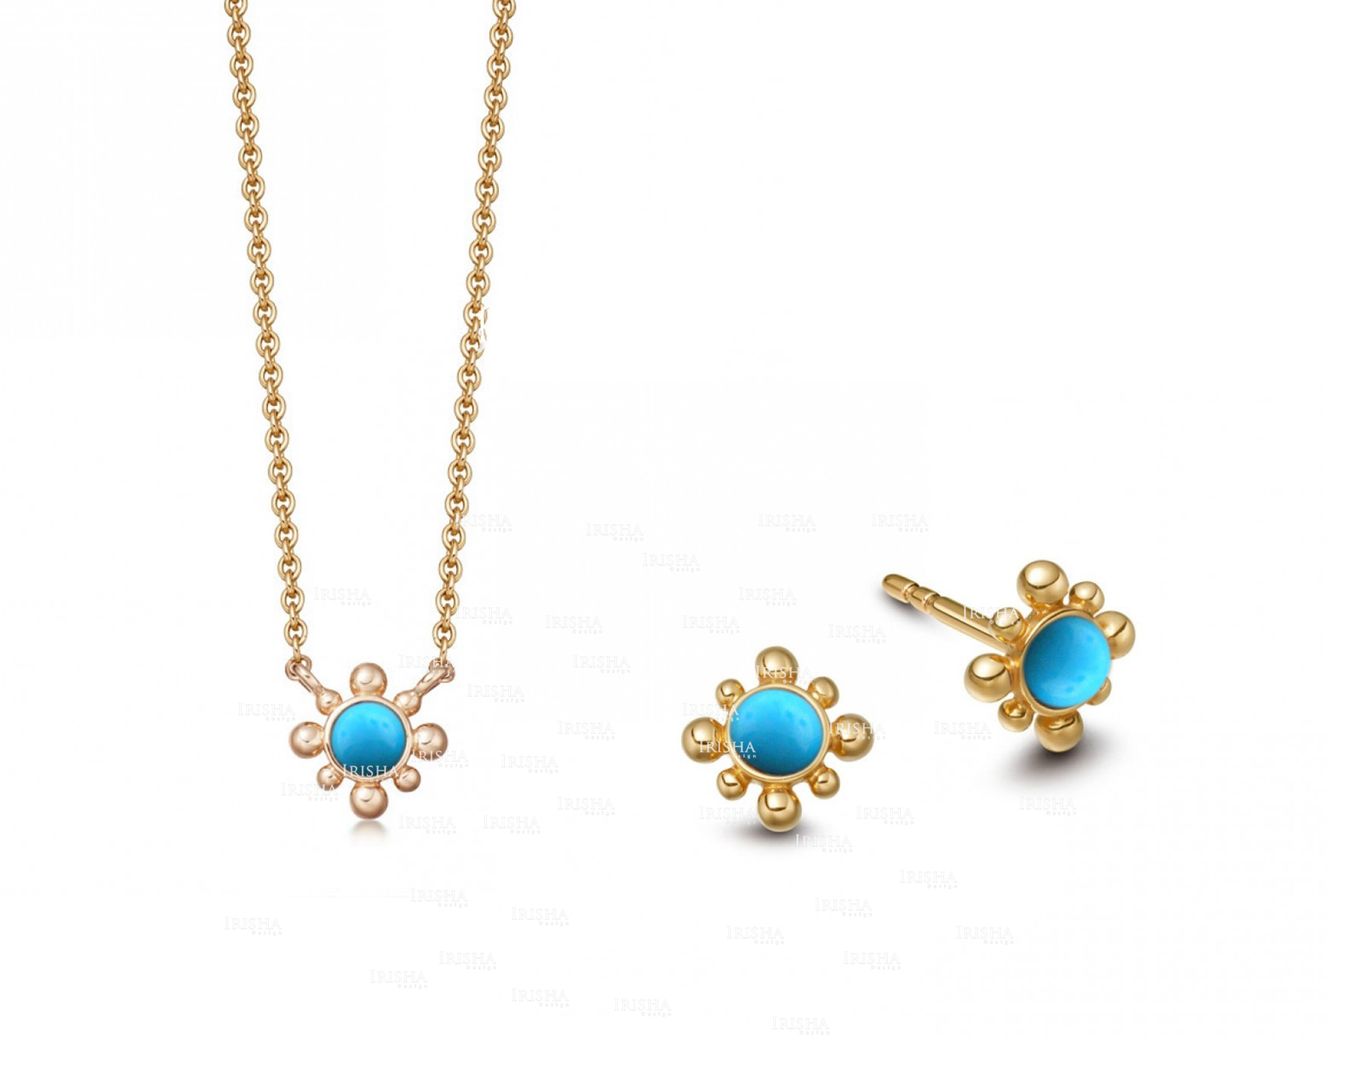 Turquoise/Opal/Moonstone Floral Earring Necklace 14K Gold Jewelry Set (1 Set)